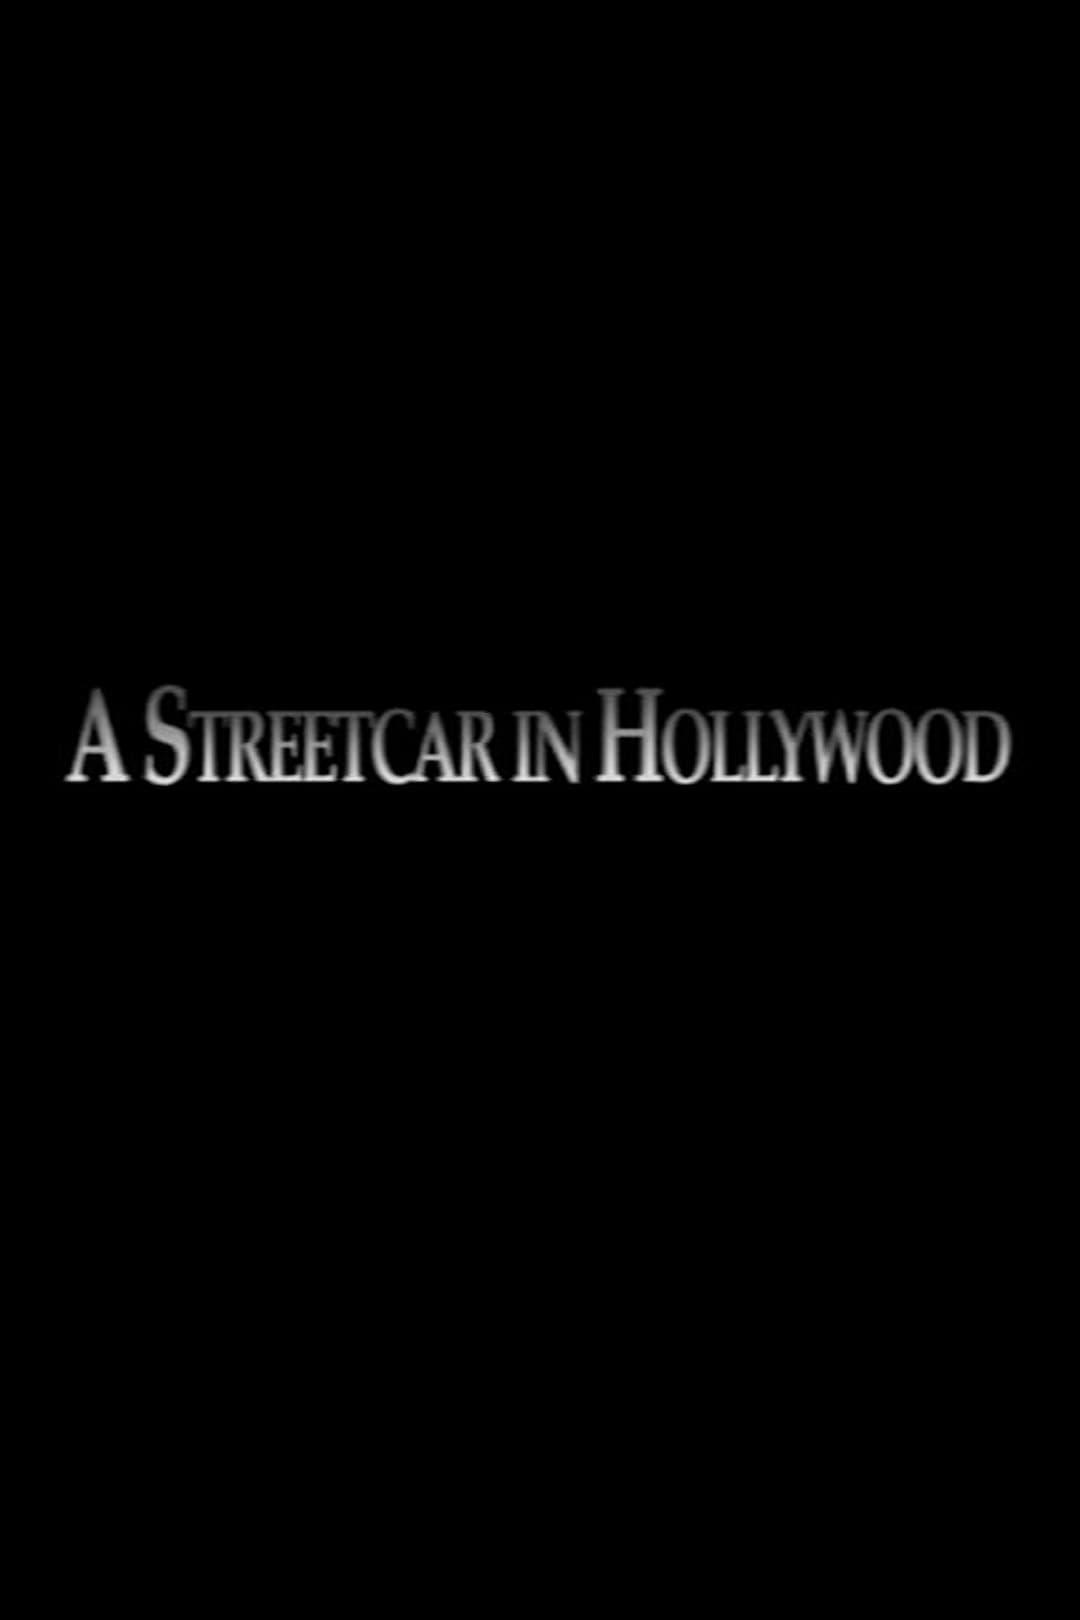 A Streetcar in Hollywood poster